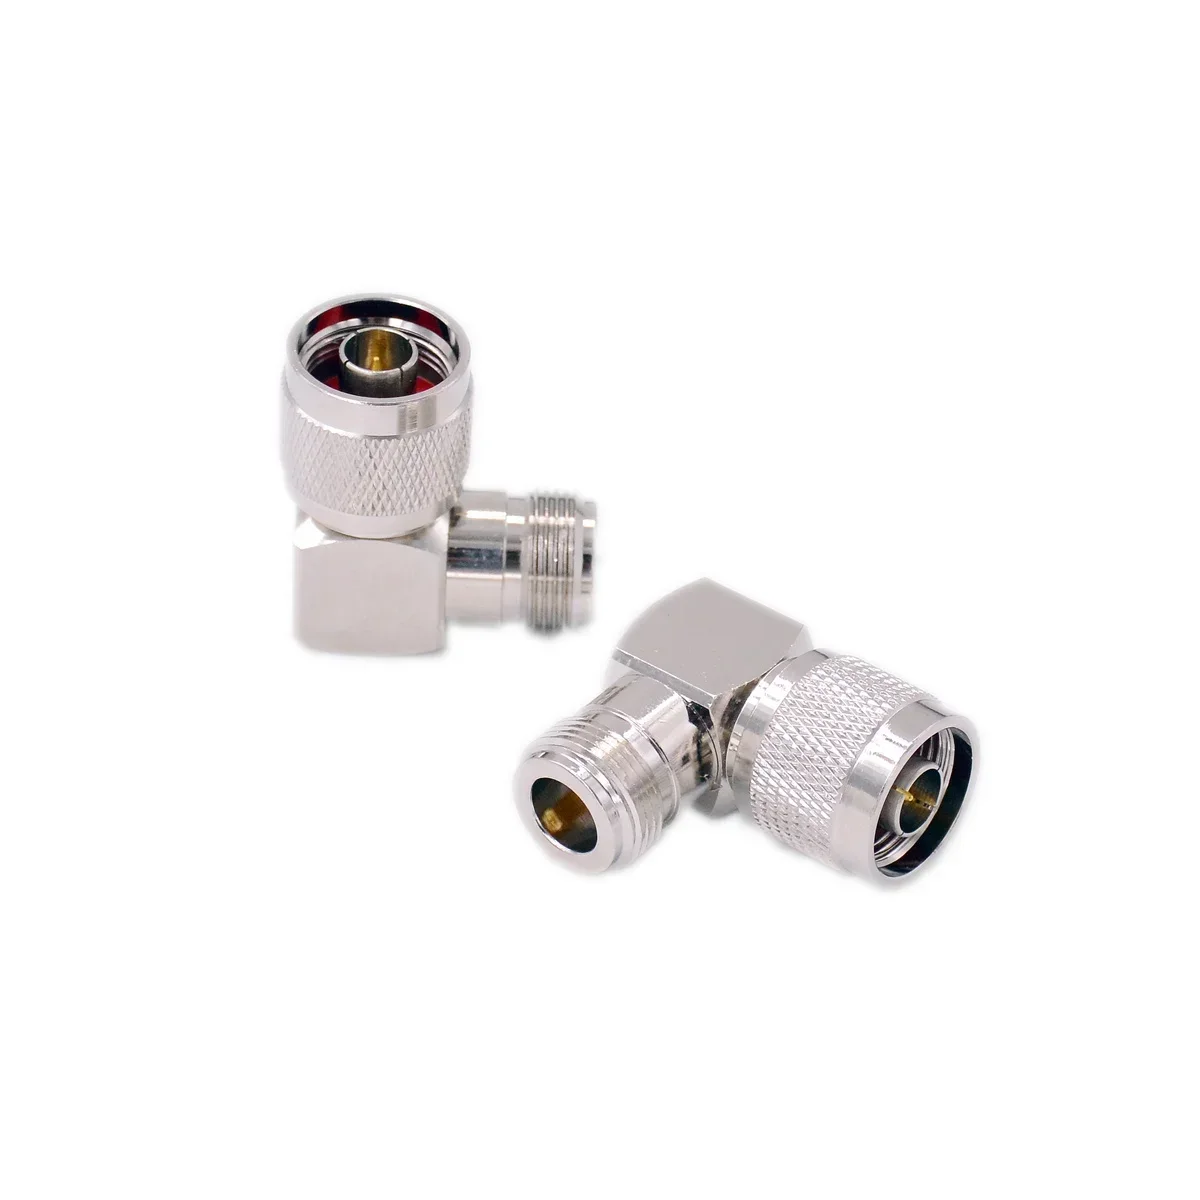 

1 Pair Coaxial Cable Connector Adapter L Shape 90 Degree N Type Male To Female Jack RF Right Angle M/F Plug Adapters